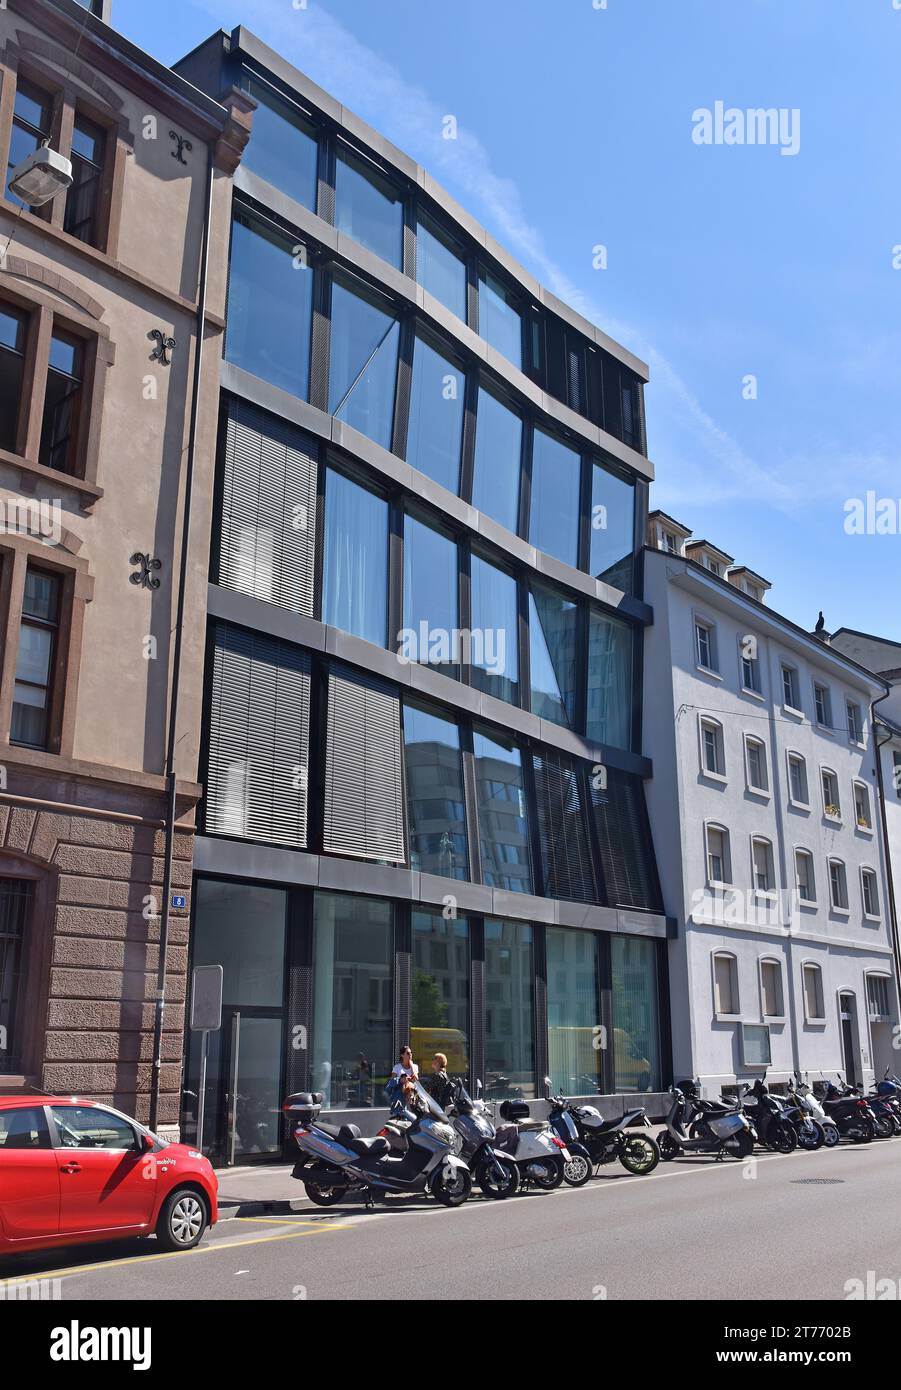 Steel-framed building, flat front, 6 bays, 5 storeys, 1 door & 29 large sheets of glass, frame is subtly distorted, in a slightly unsettling way. Stock Photo